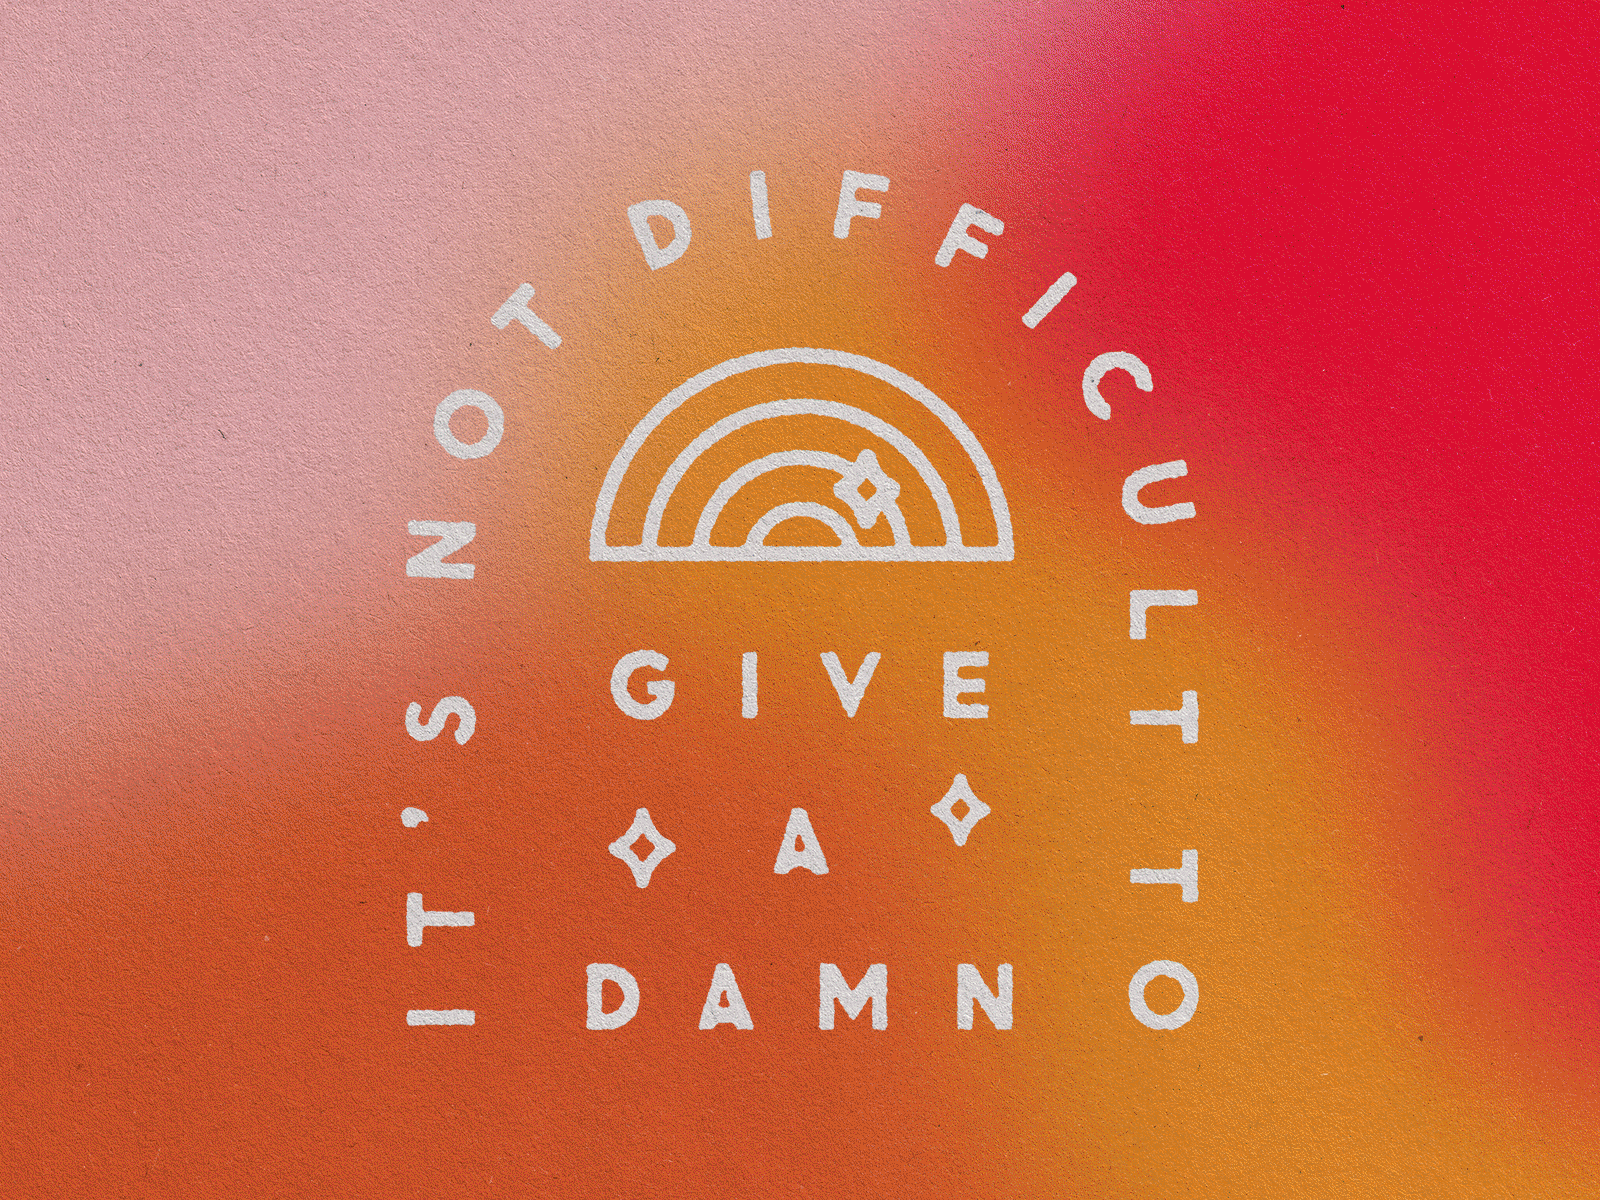 It's not difficult to give a damn atomica care crest flat illustration gif give a damn gradient icon illustration ink bleed inky positive poster rainbow sparkle true grit texture supply type typography typography poster